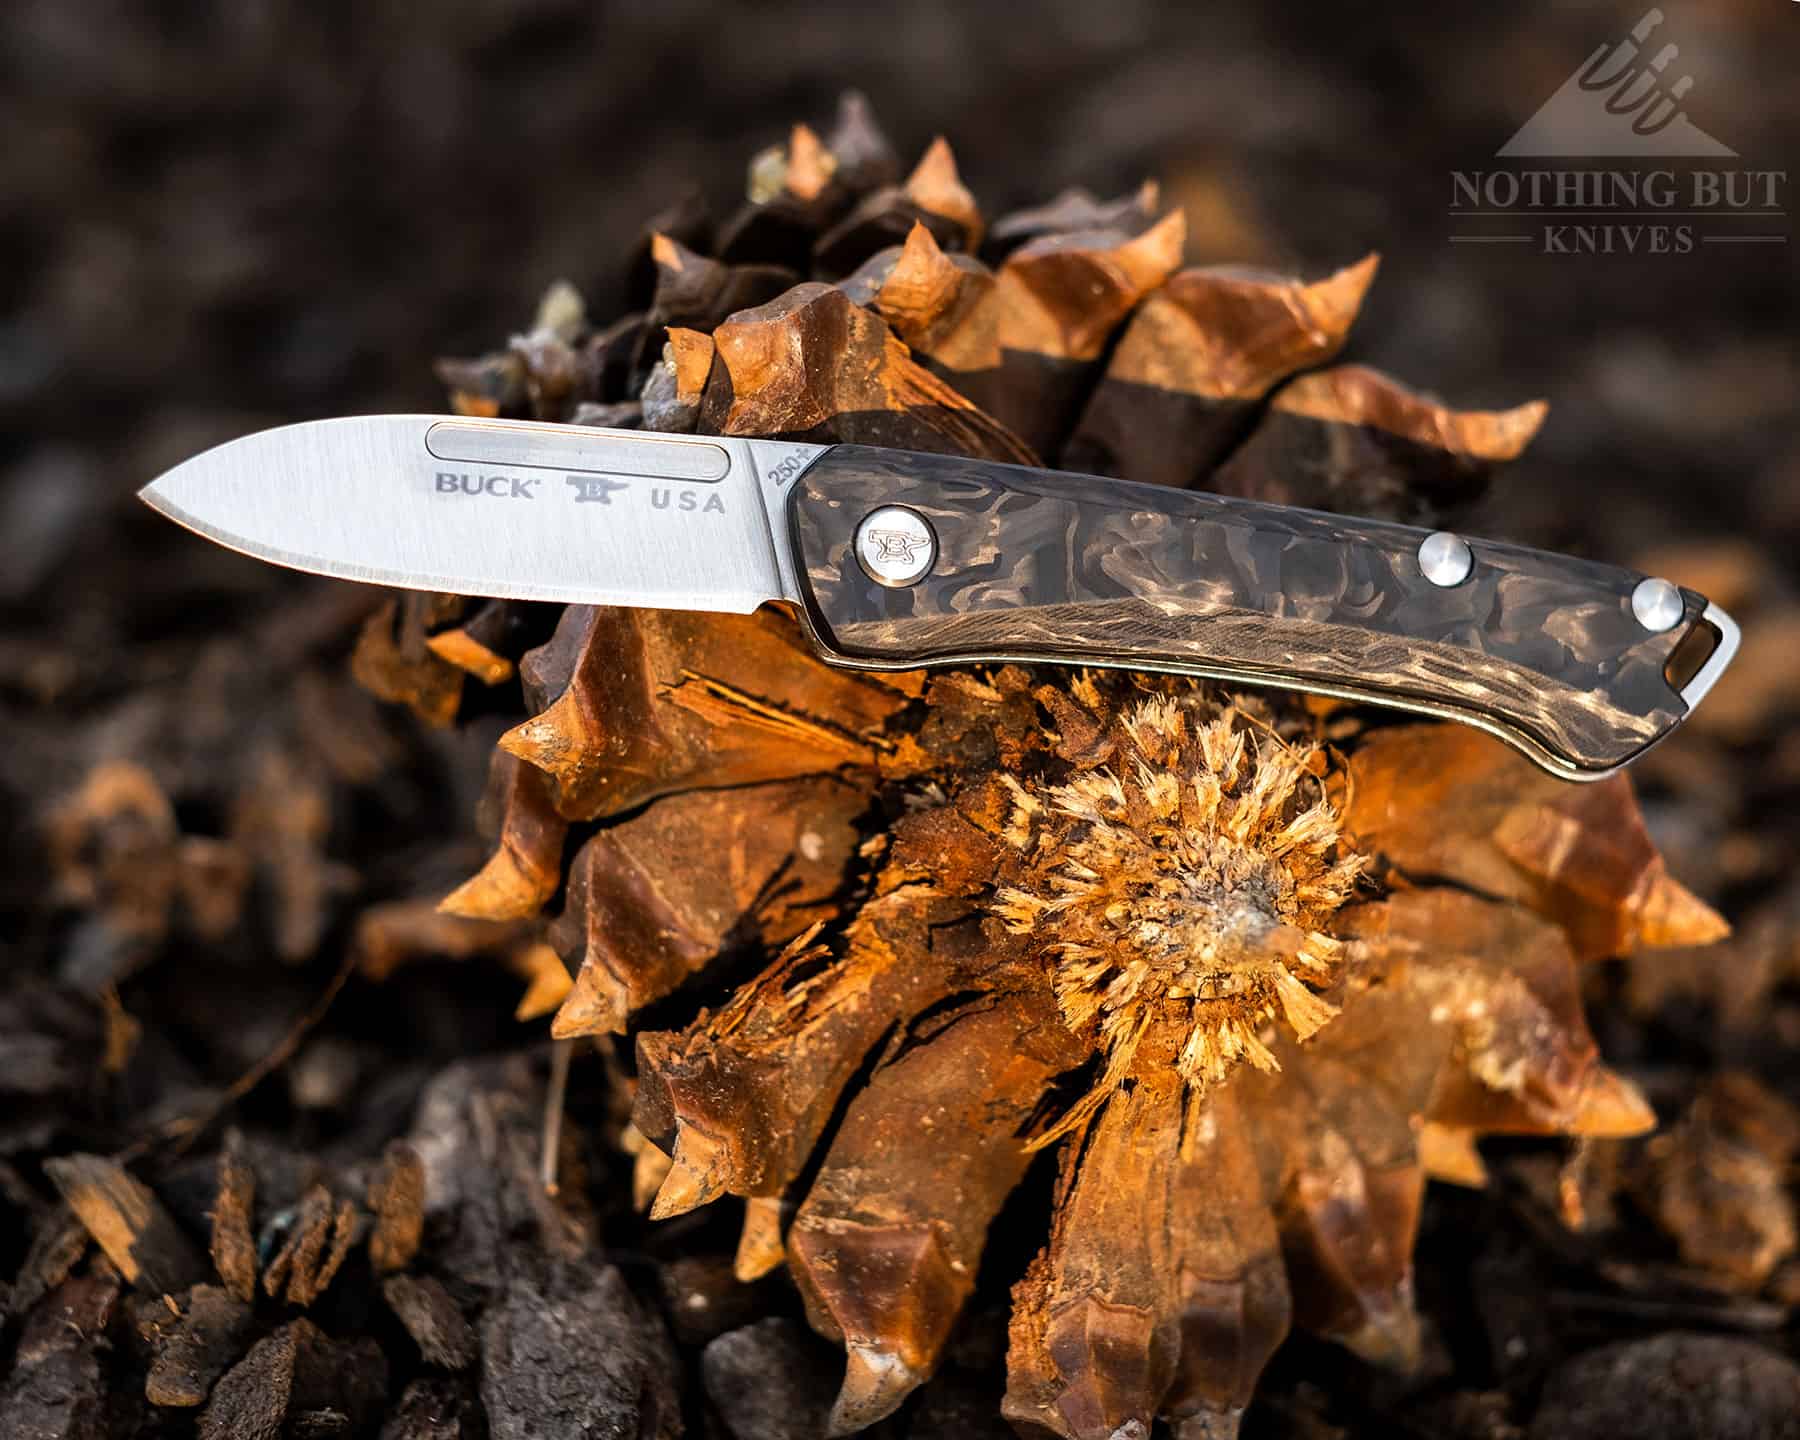 The Buck Saunter is a model style slip joint knife. It is shown here outdoors on a pinecone. 